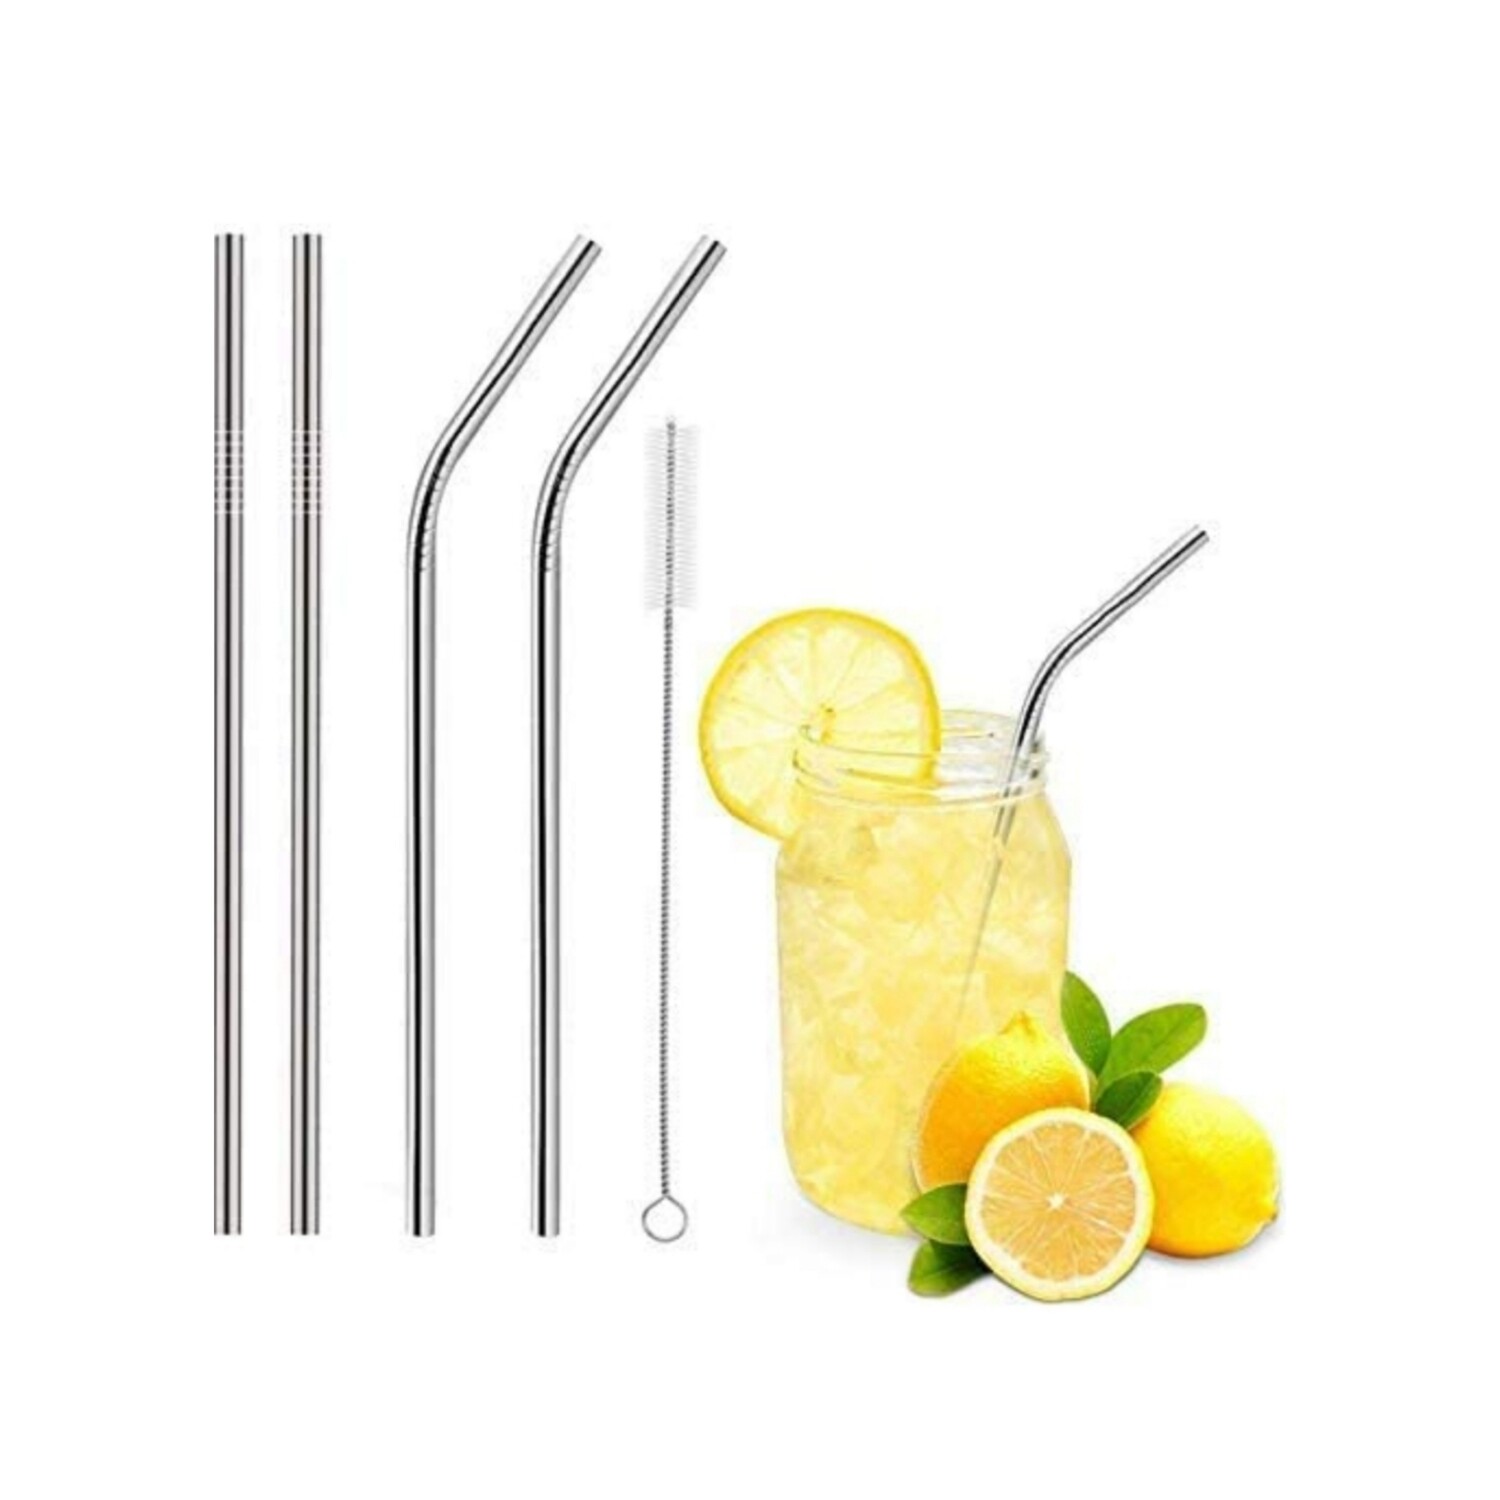 Reusable Stainless Steel Drinking Straws (2 Bend & 2 Straight Straws, 1 Cleaning Brush)